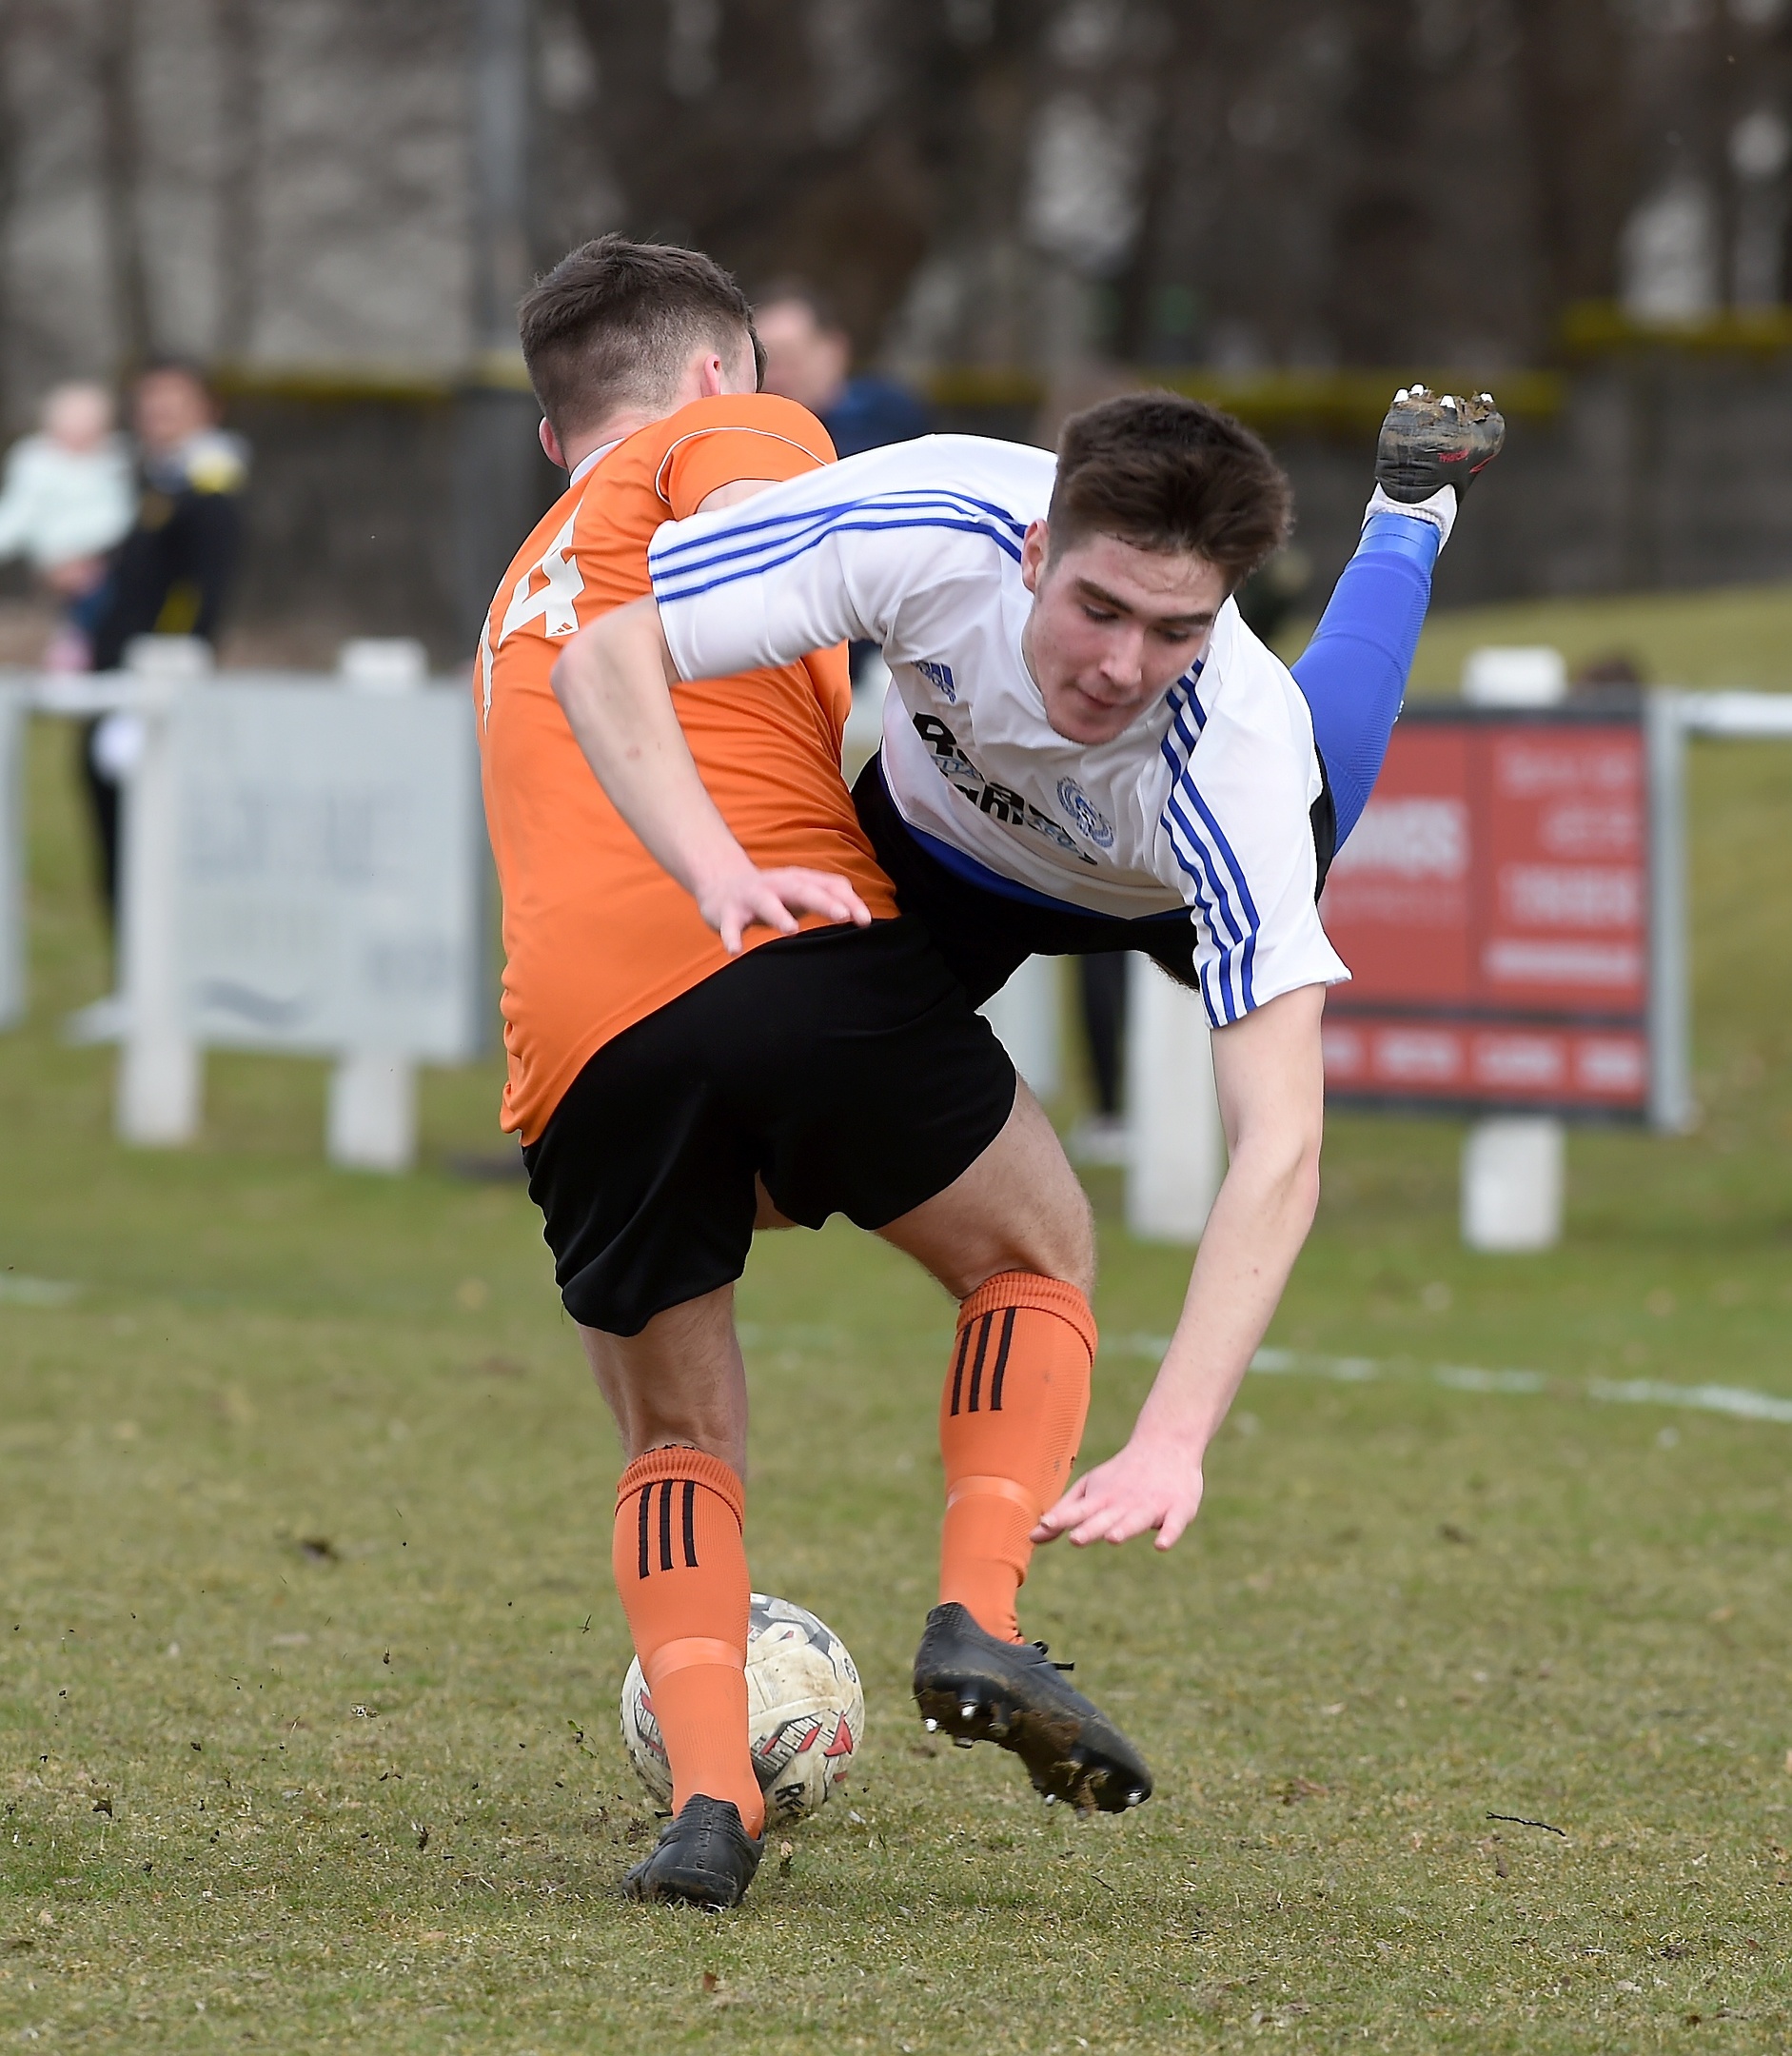 Nairn County's Max Ewan is upended by Rothes' Blair Maclennan.